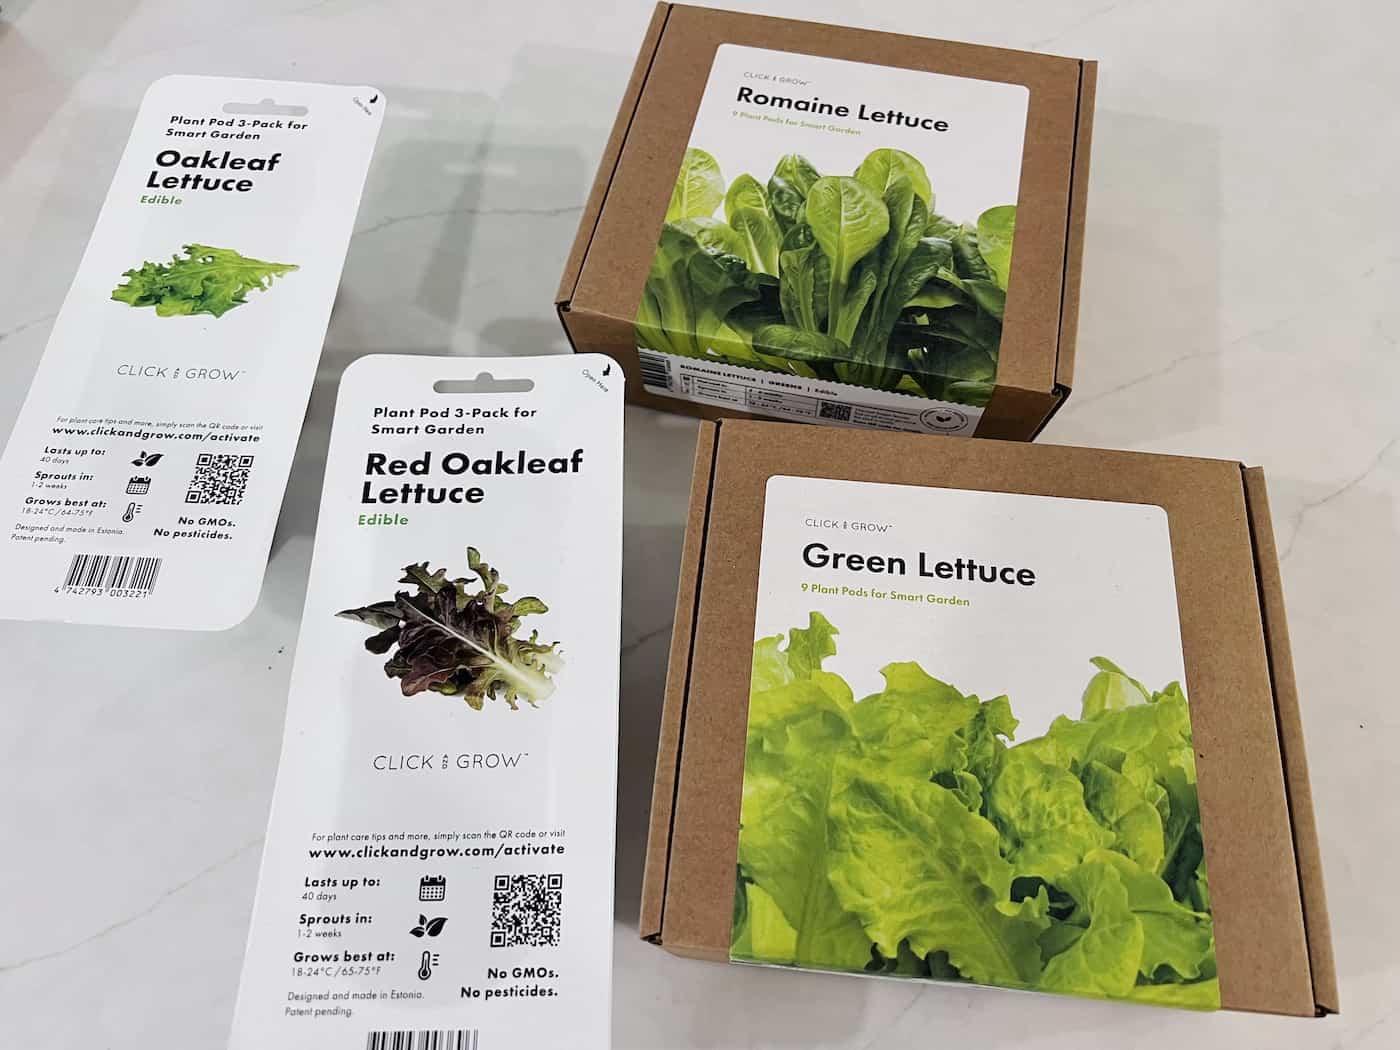 Lettuce pods of different types for a smart garden